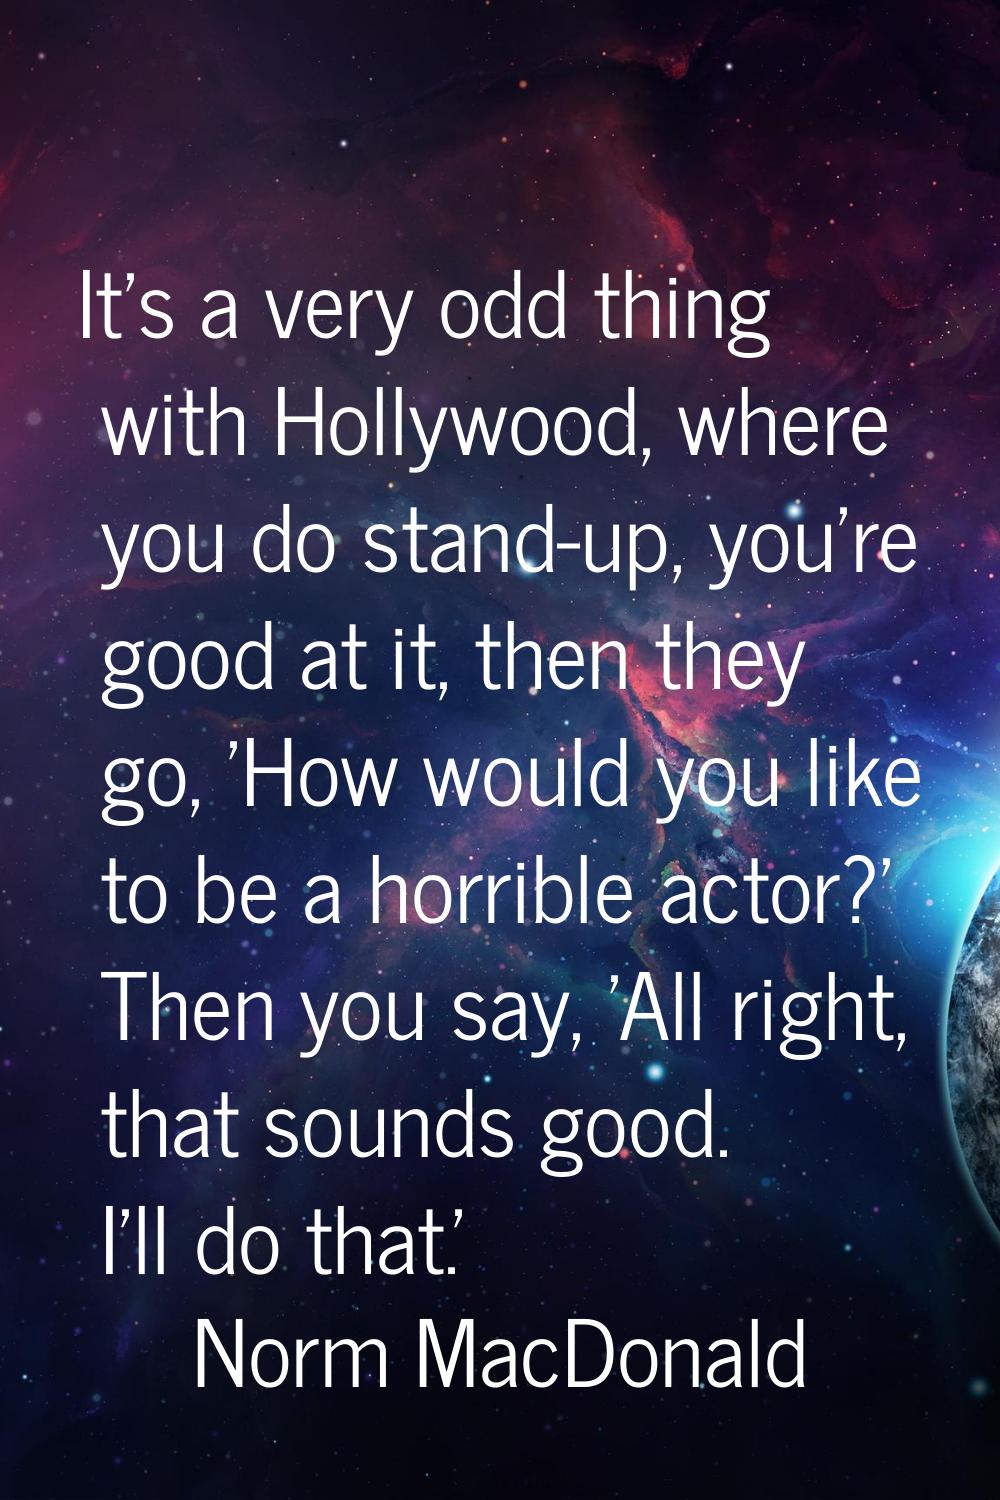 It's a very odd thing with Hollywood, where you do stand-up, you're good at it, then they go, 'How 